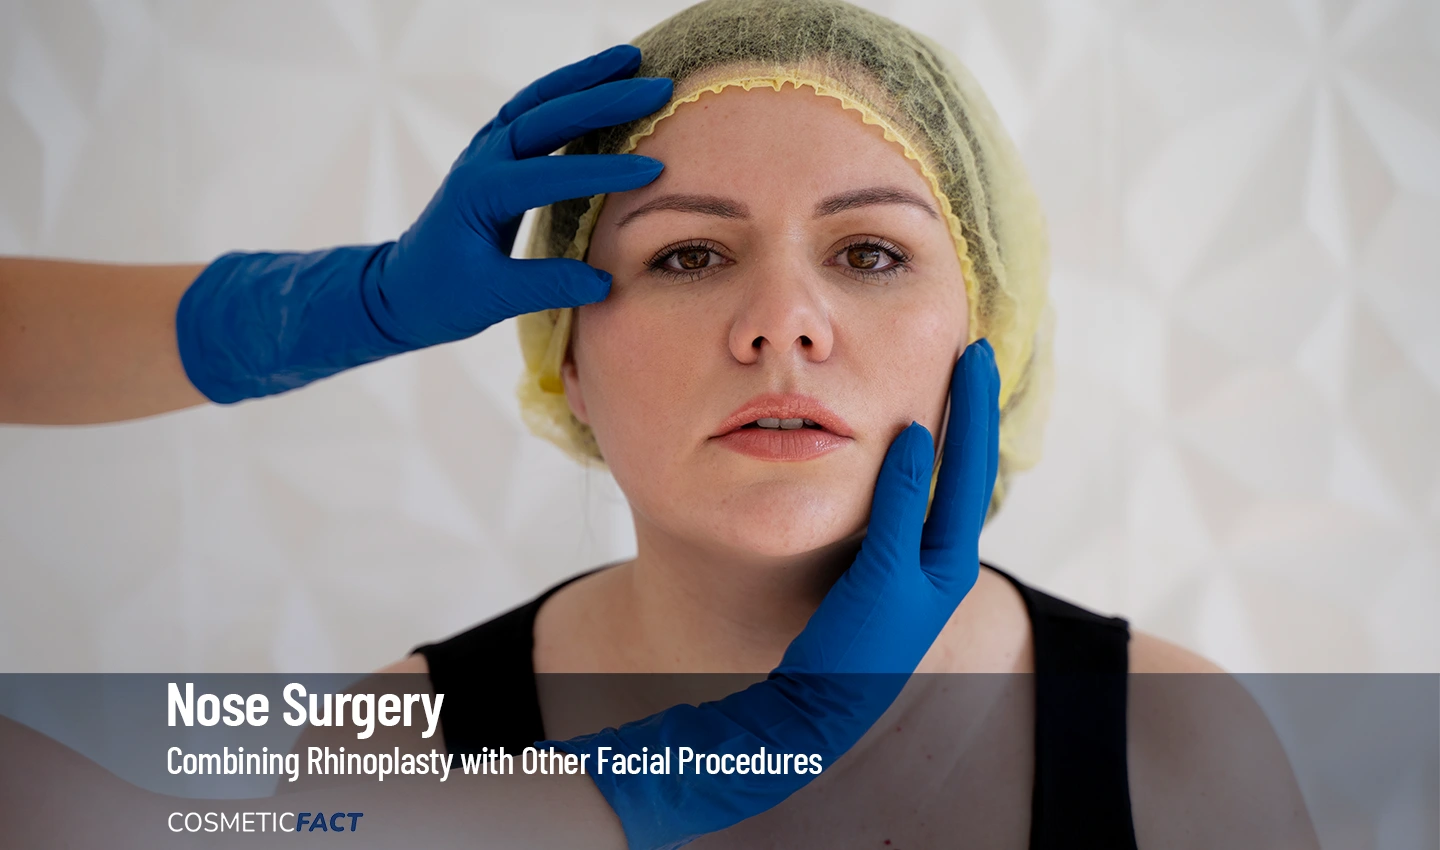 A plastic surgeon evaluates a woman for a combining procedure of rhinoplasty and chin augmentation.